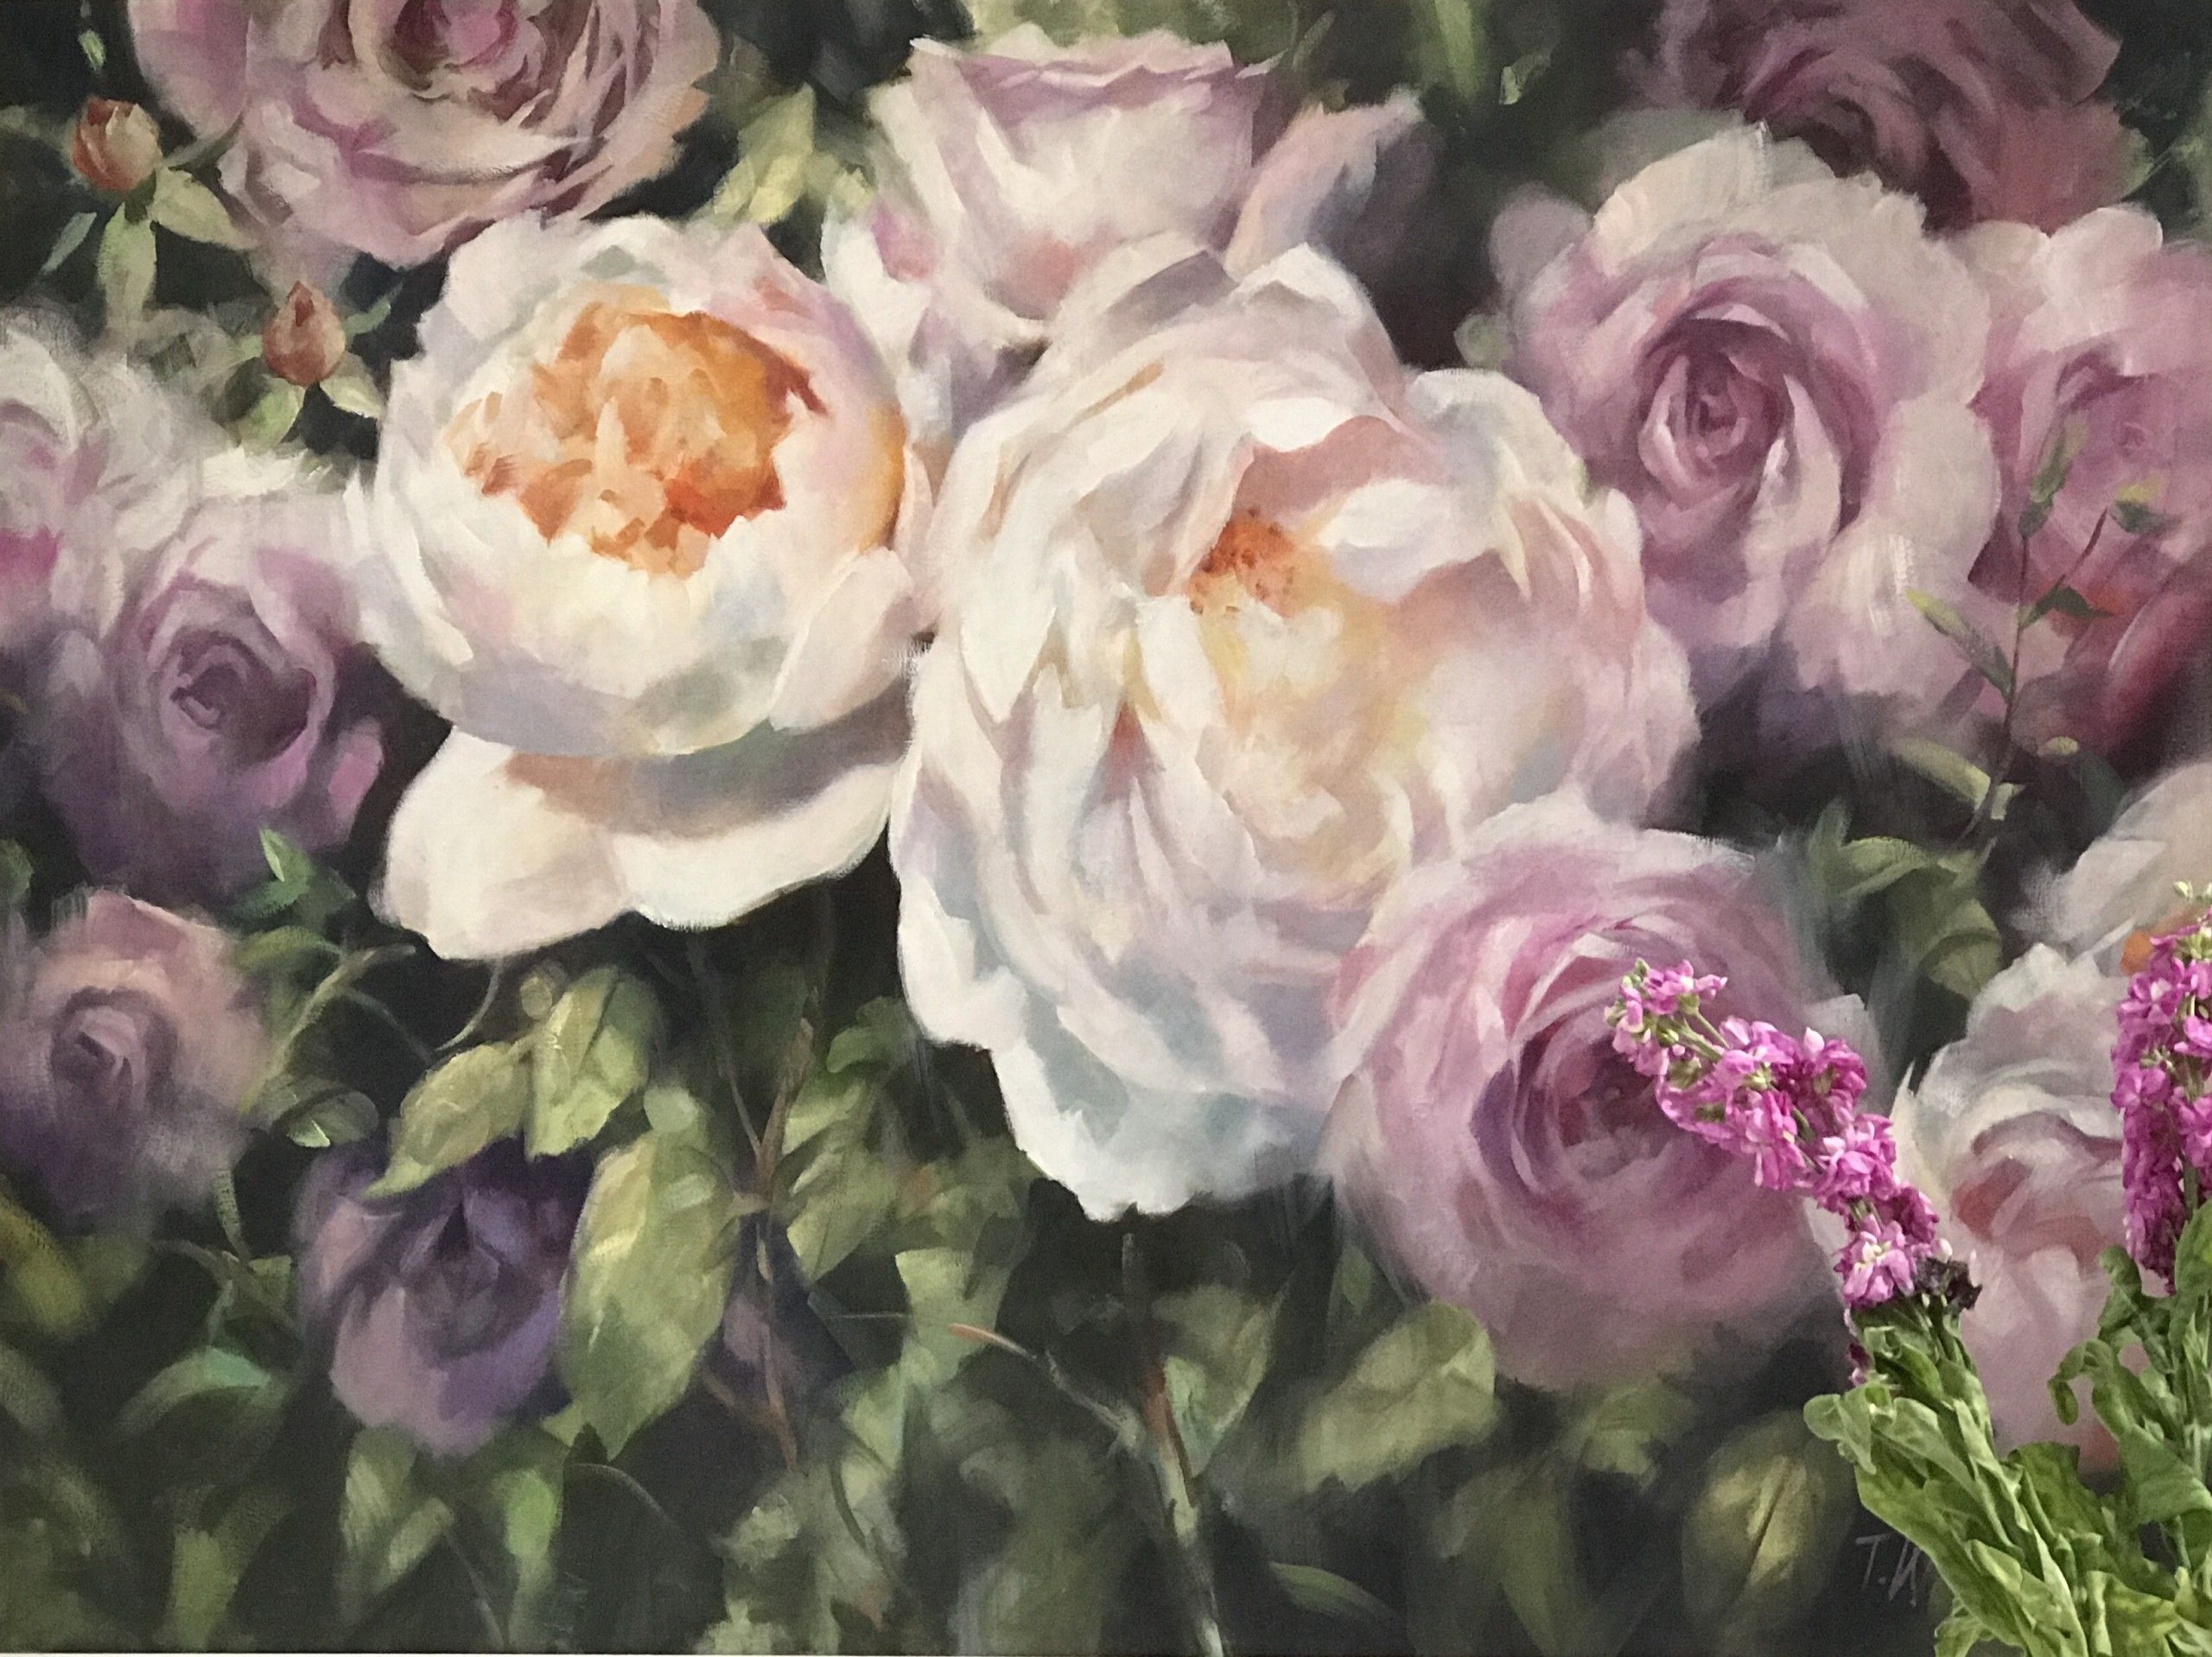 Rose Bouquets by Trevor Waugh